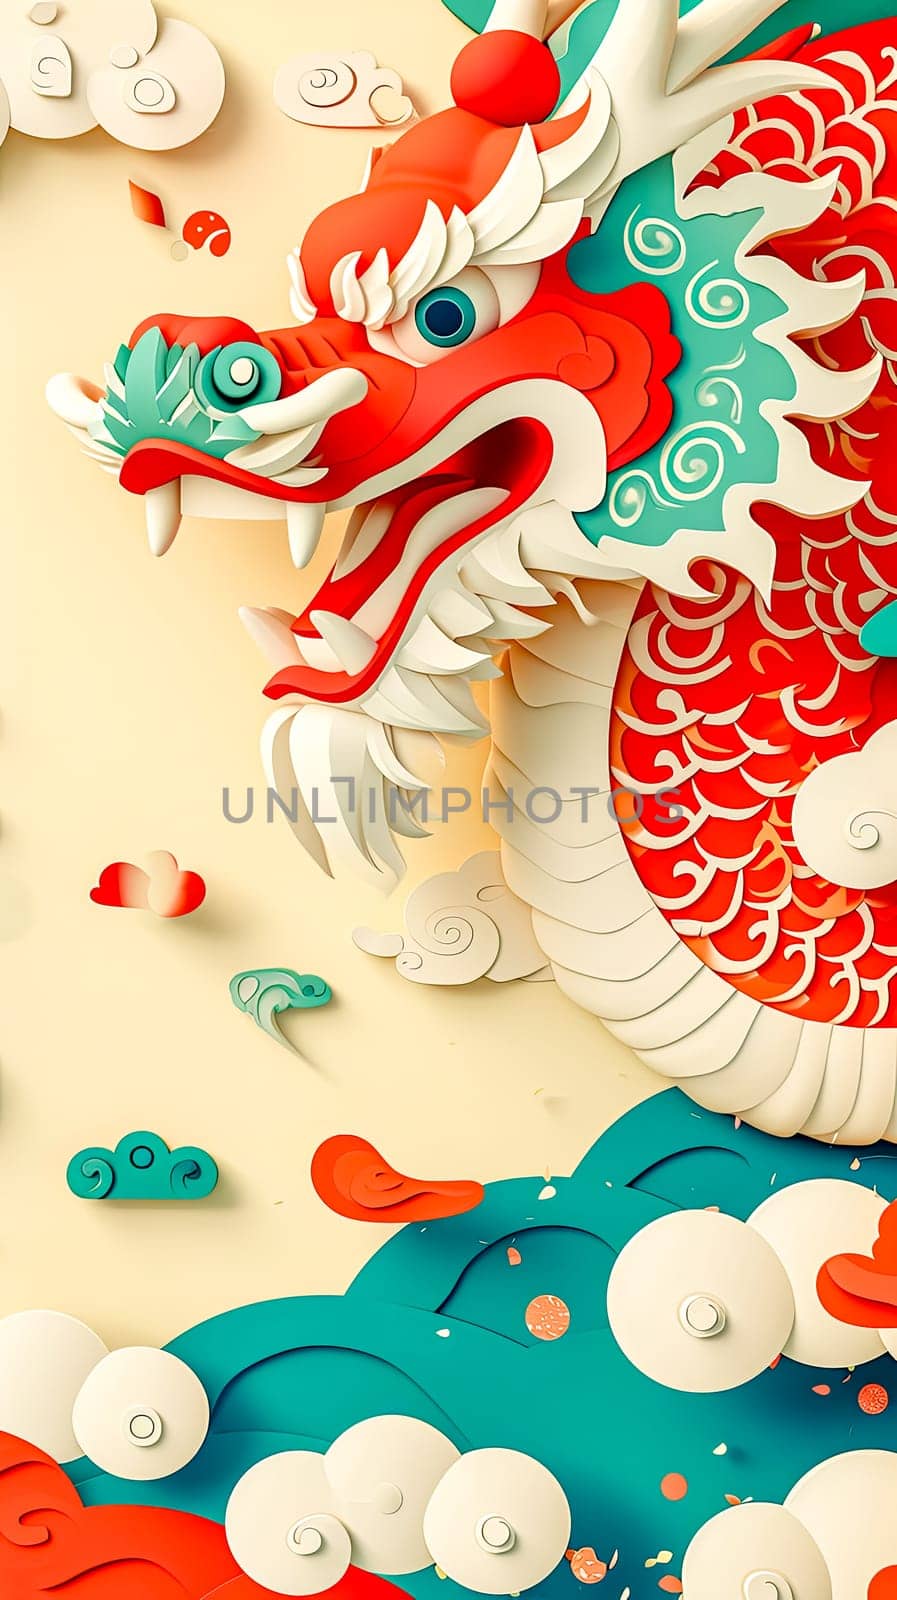 Chinese dragon in bold red and white colors, emerging from rolling teal waves with stylized clouds, against a soft beige background, vertical 3D